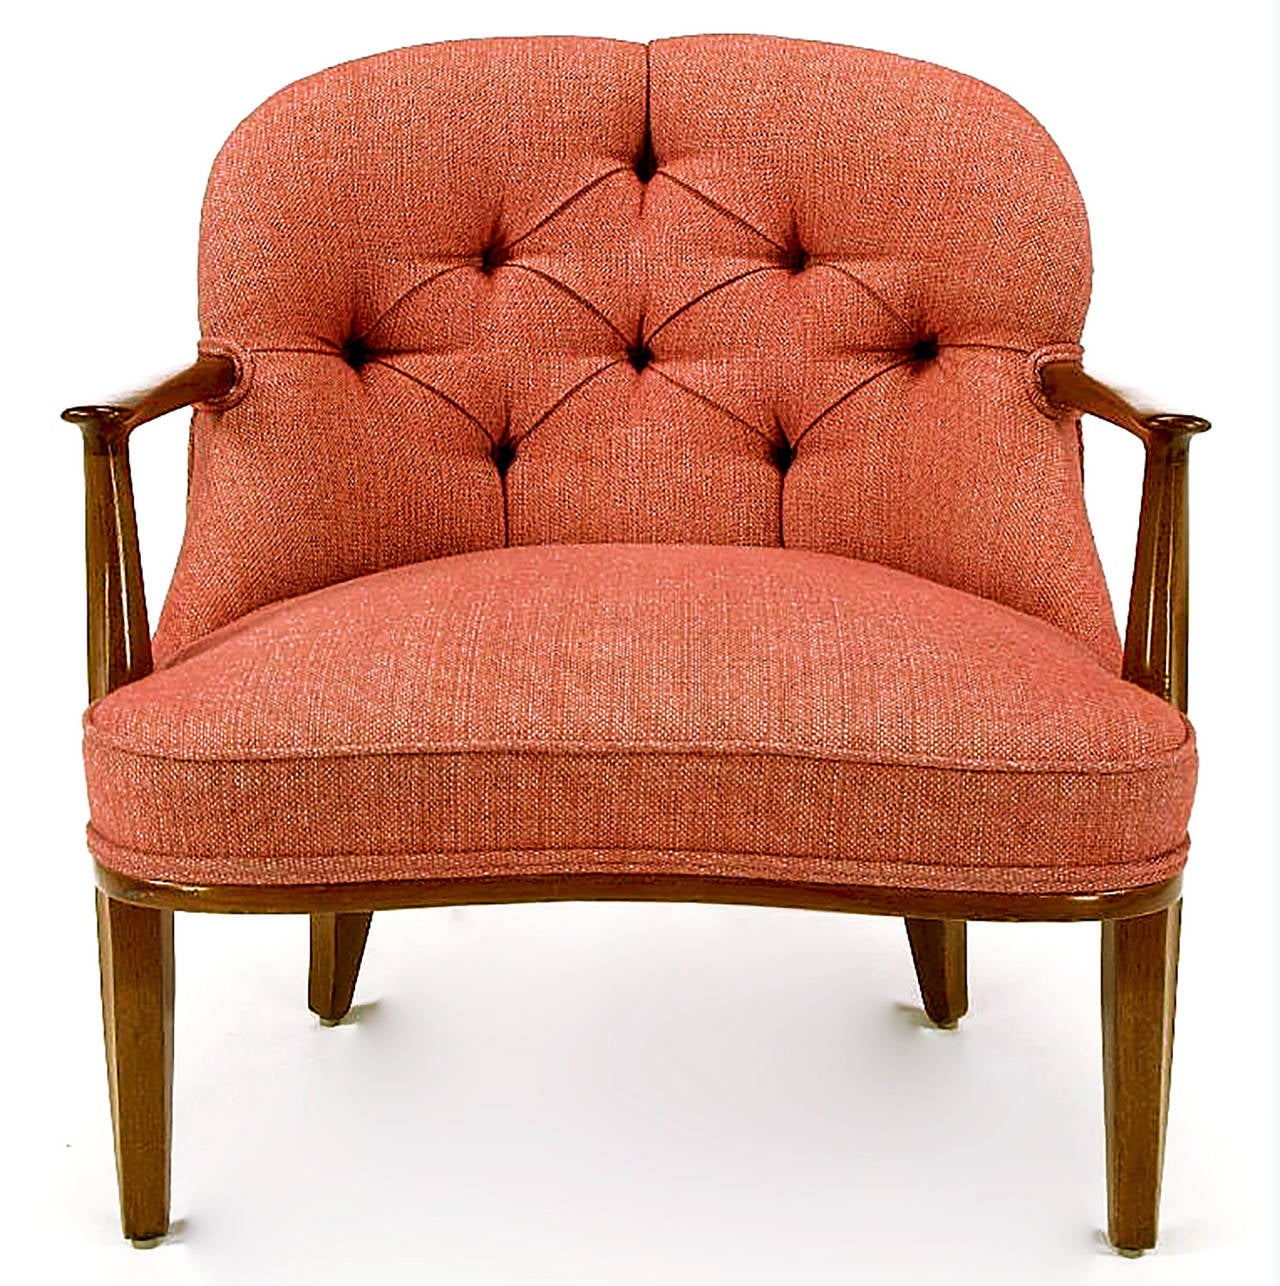 Pair of Edward Wormley for Dunbar Janus collection armchairs. Carved walnut arms and legs with exposed frame. Raspberry red linen upholstery with a button tufted back with curved and radius seat corner.